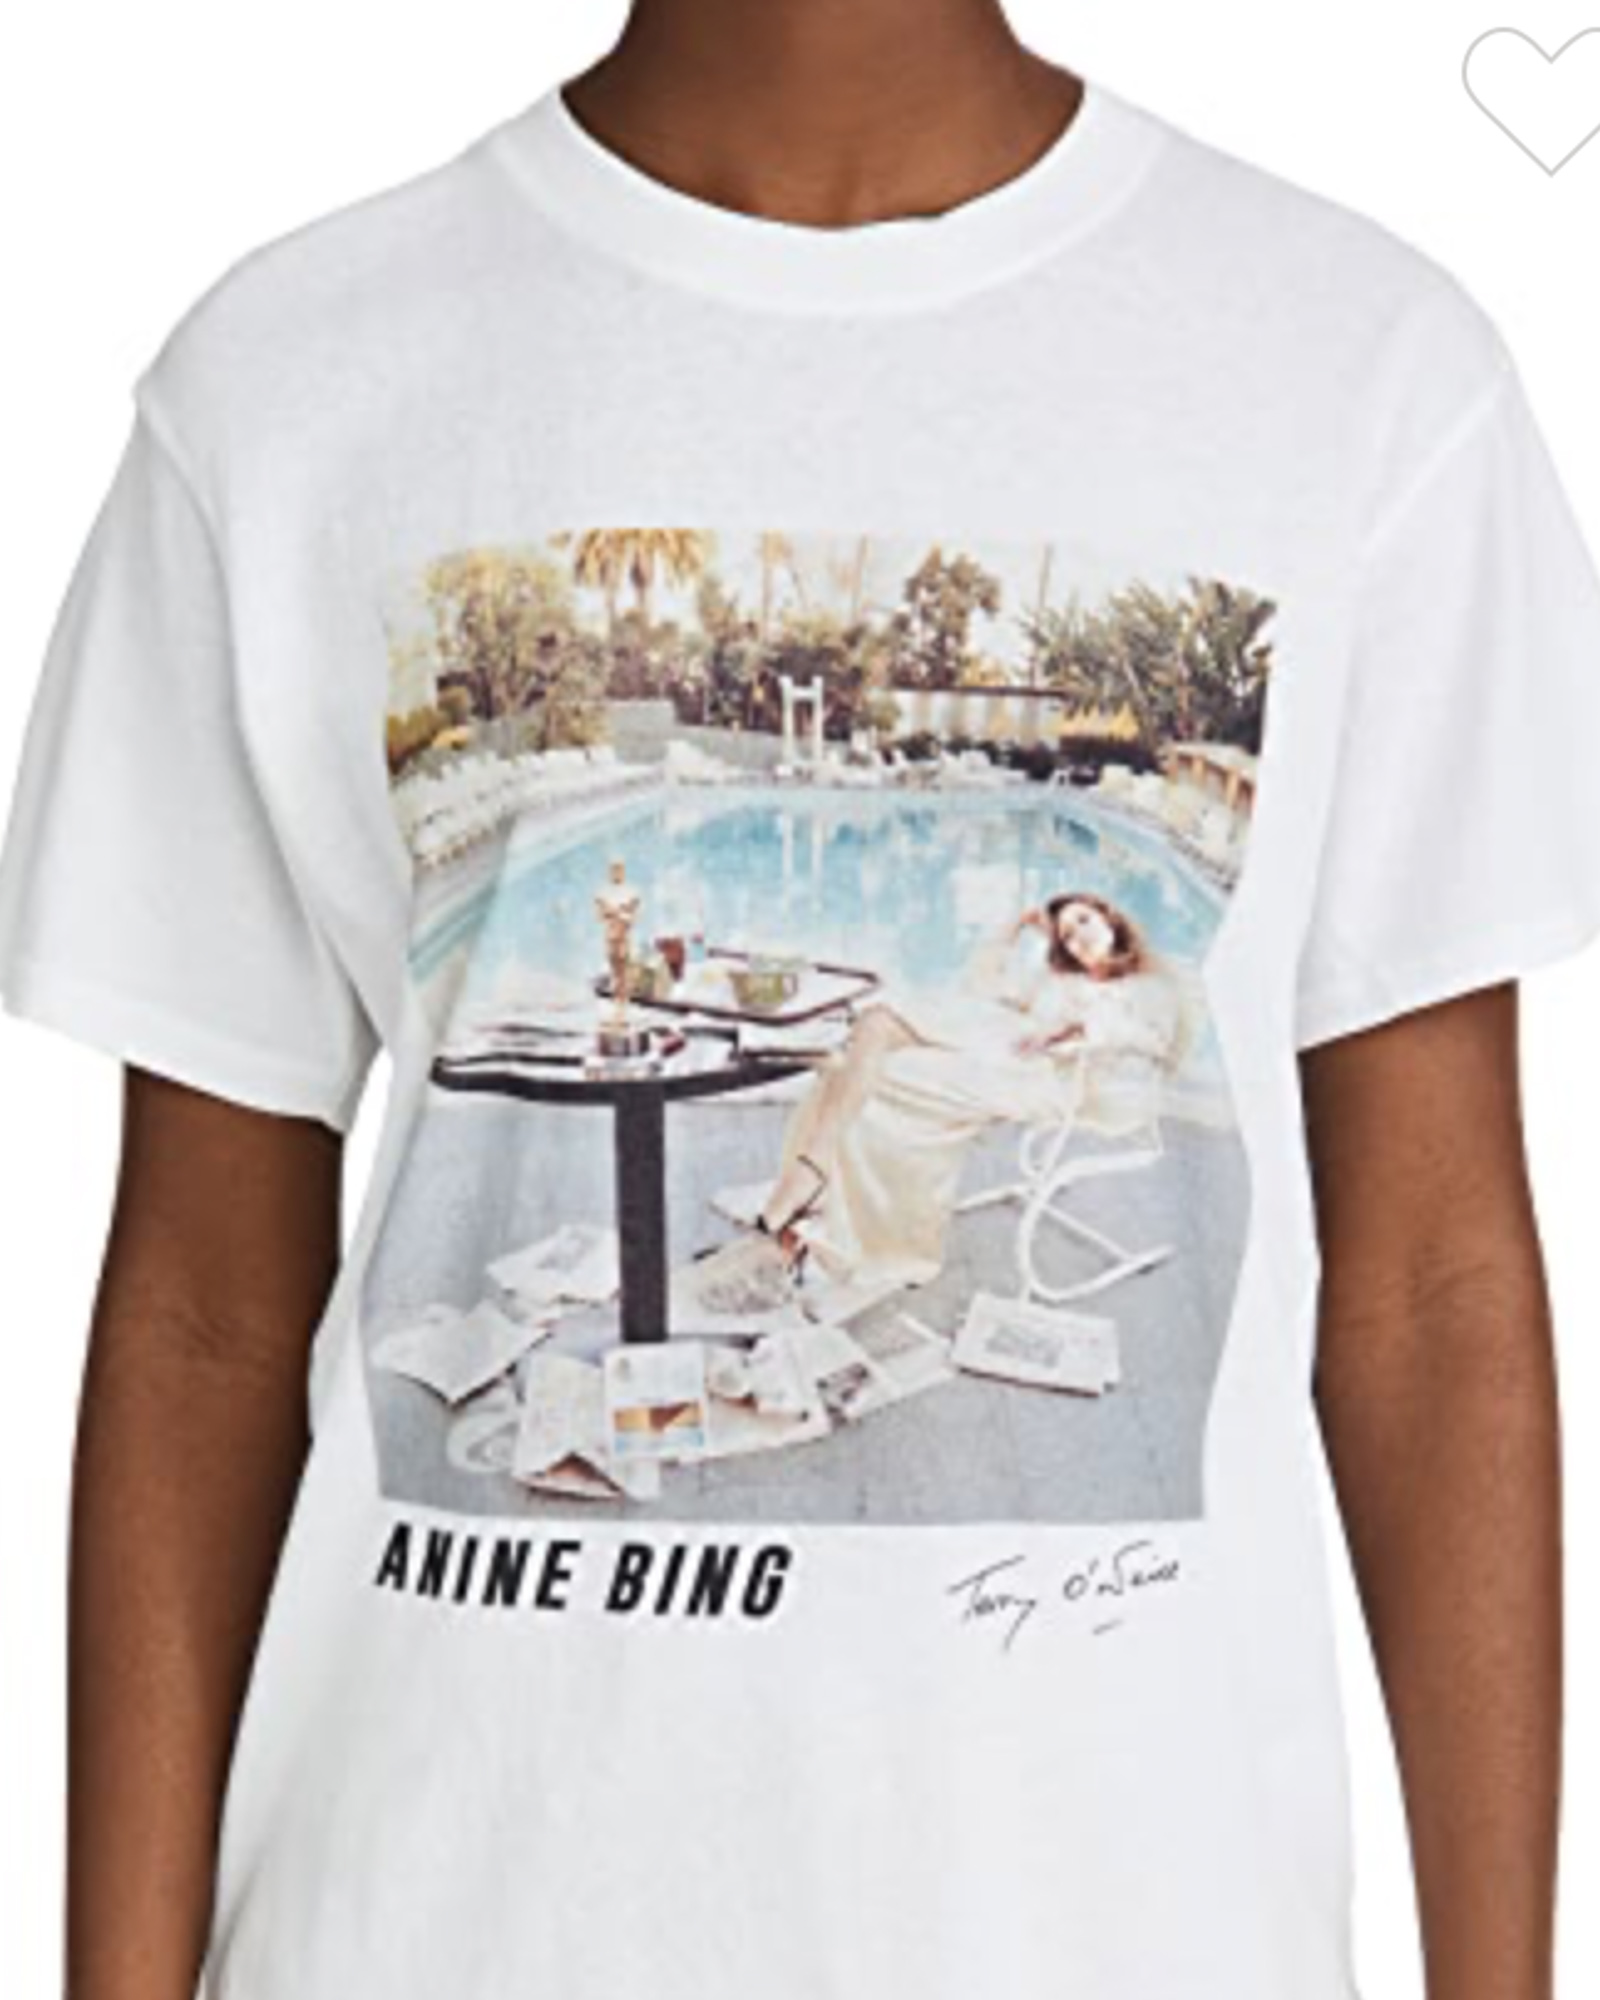 Thee Annie Bing Lili tee in white.